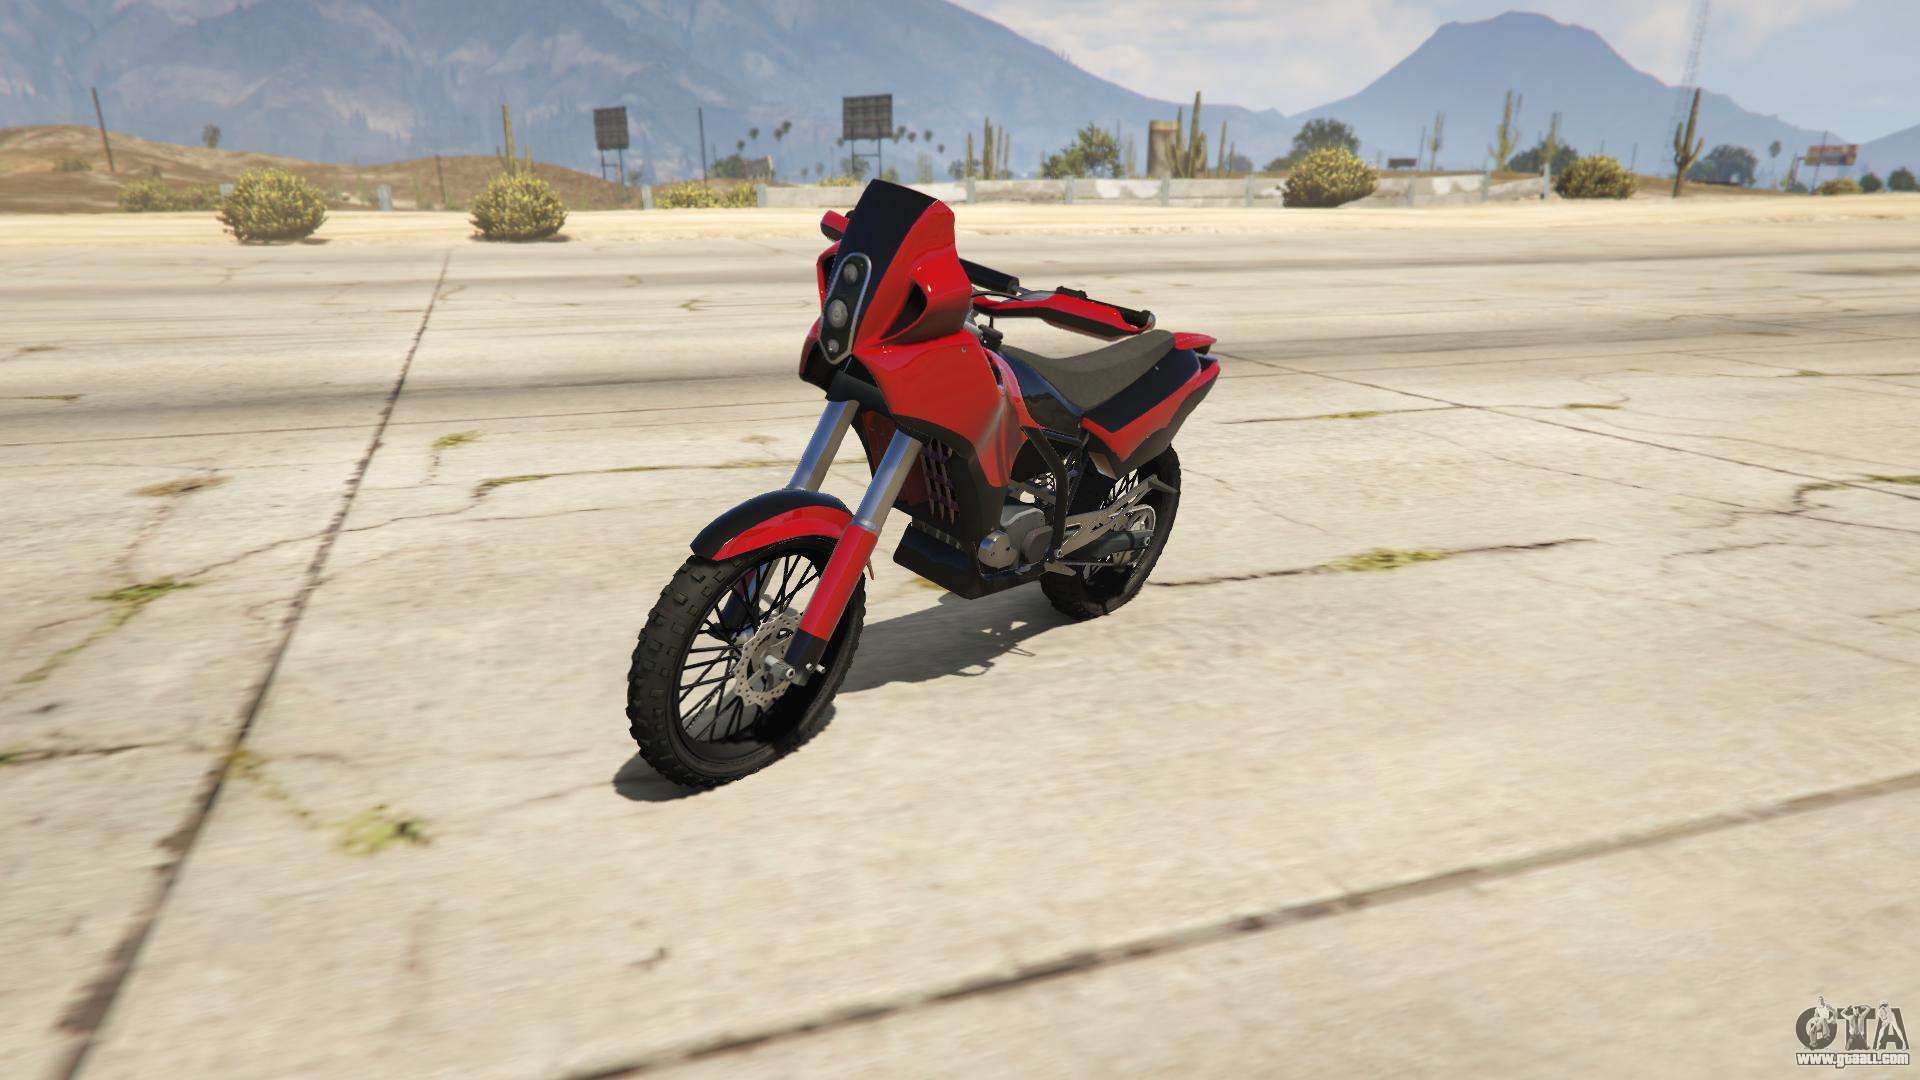 Nagasaki BF400 from GTA Online - front view